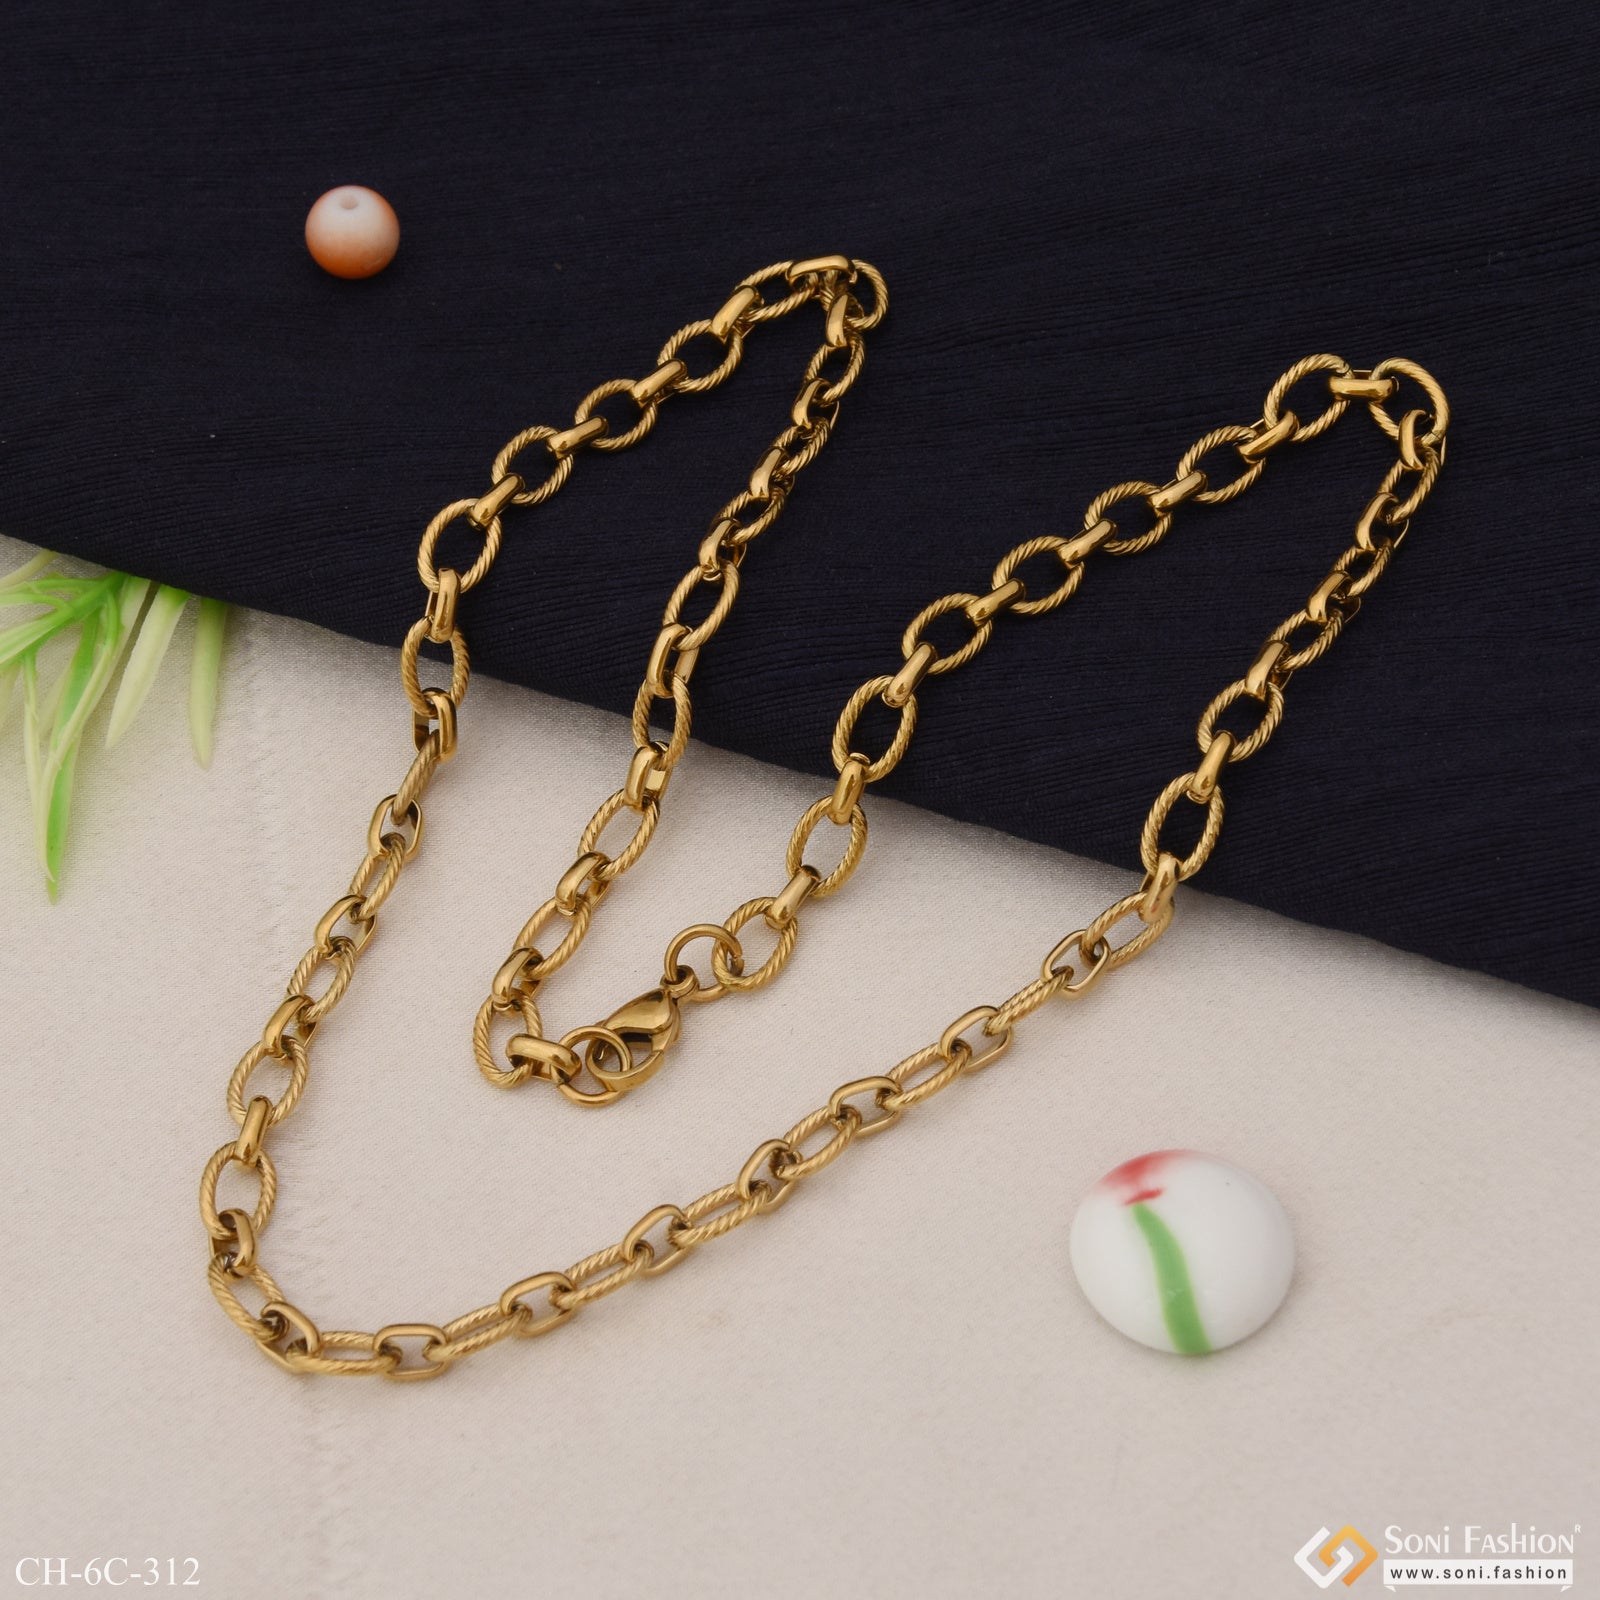 Cool Design Superior Quality Dainty Design Best Quality Chain for Men - Style C312